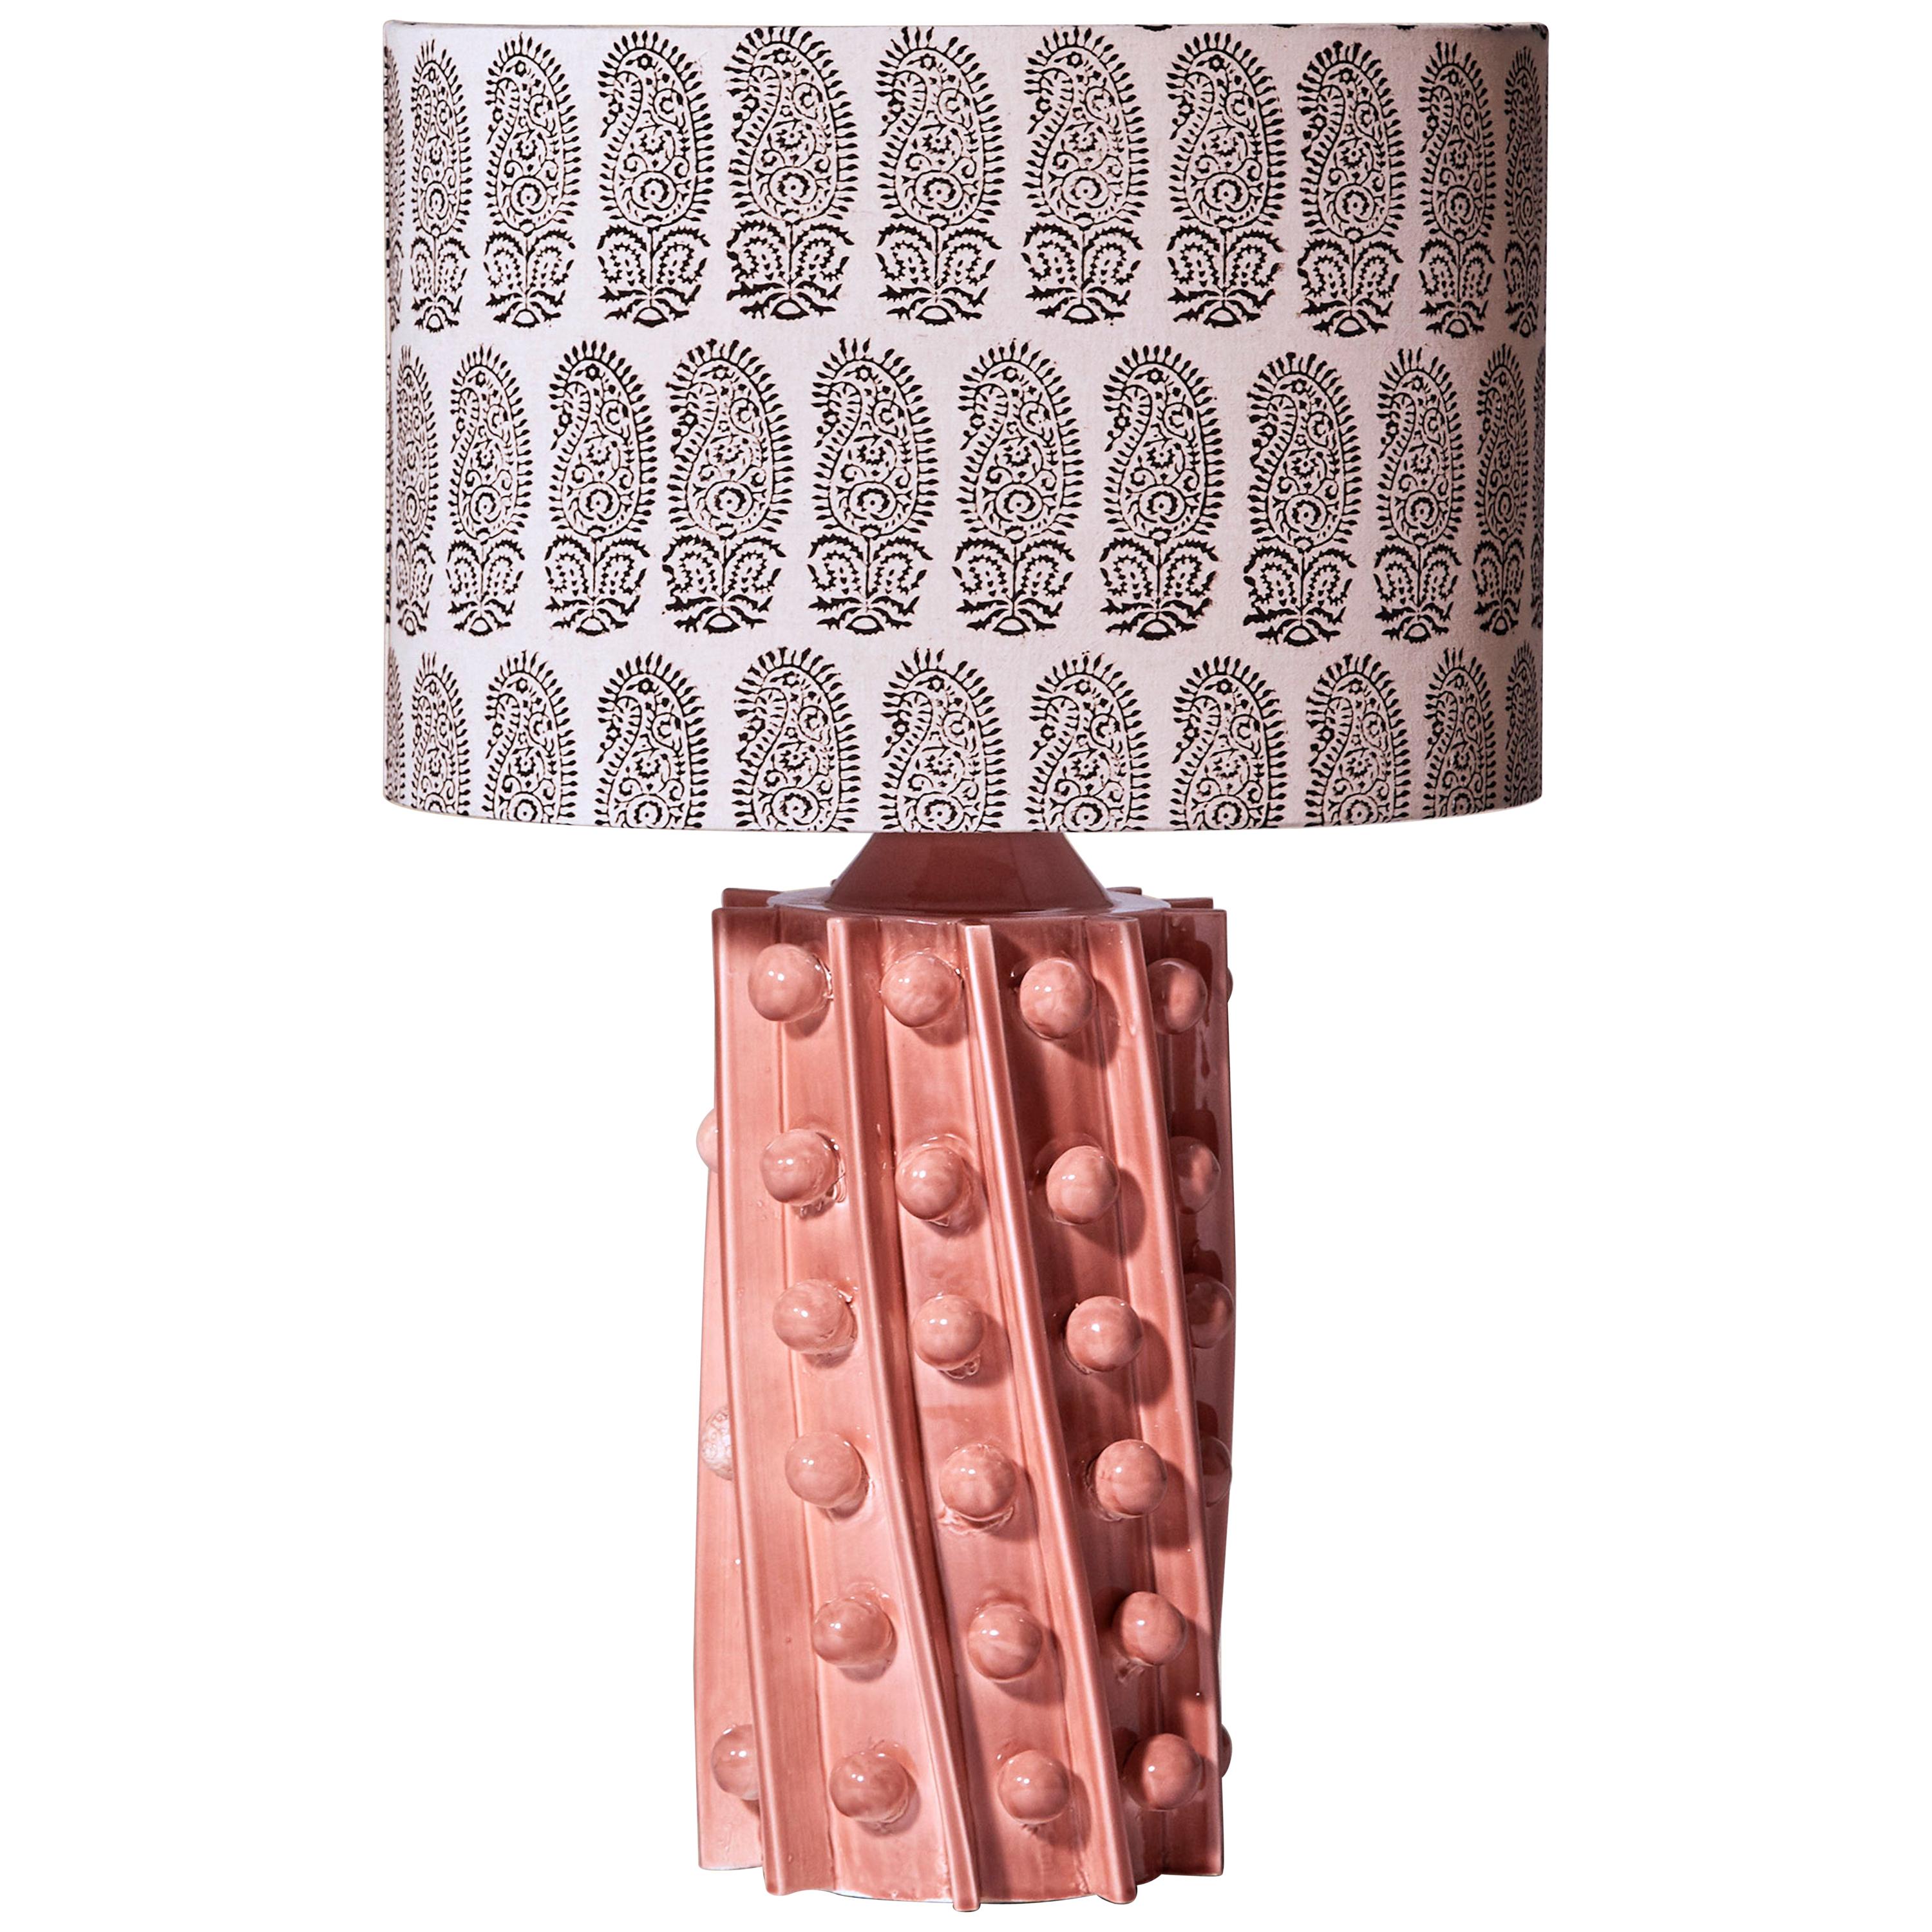 Bosphore Lamp with a Glazed Ceramic and Fabric Oval Lampshade by Laura Gonzalez